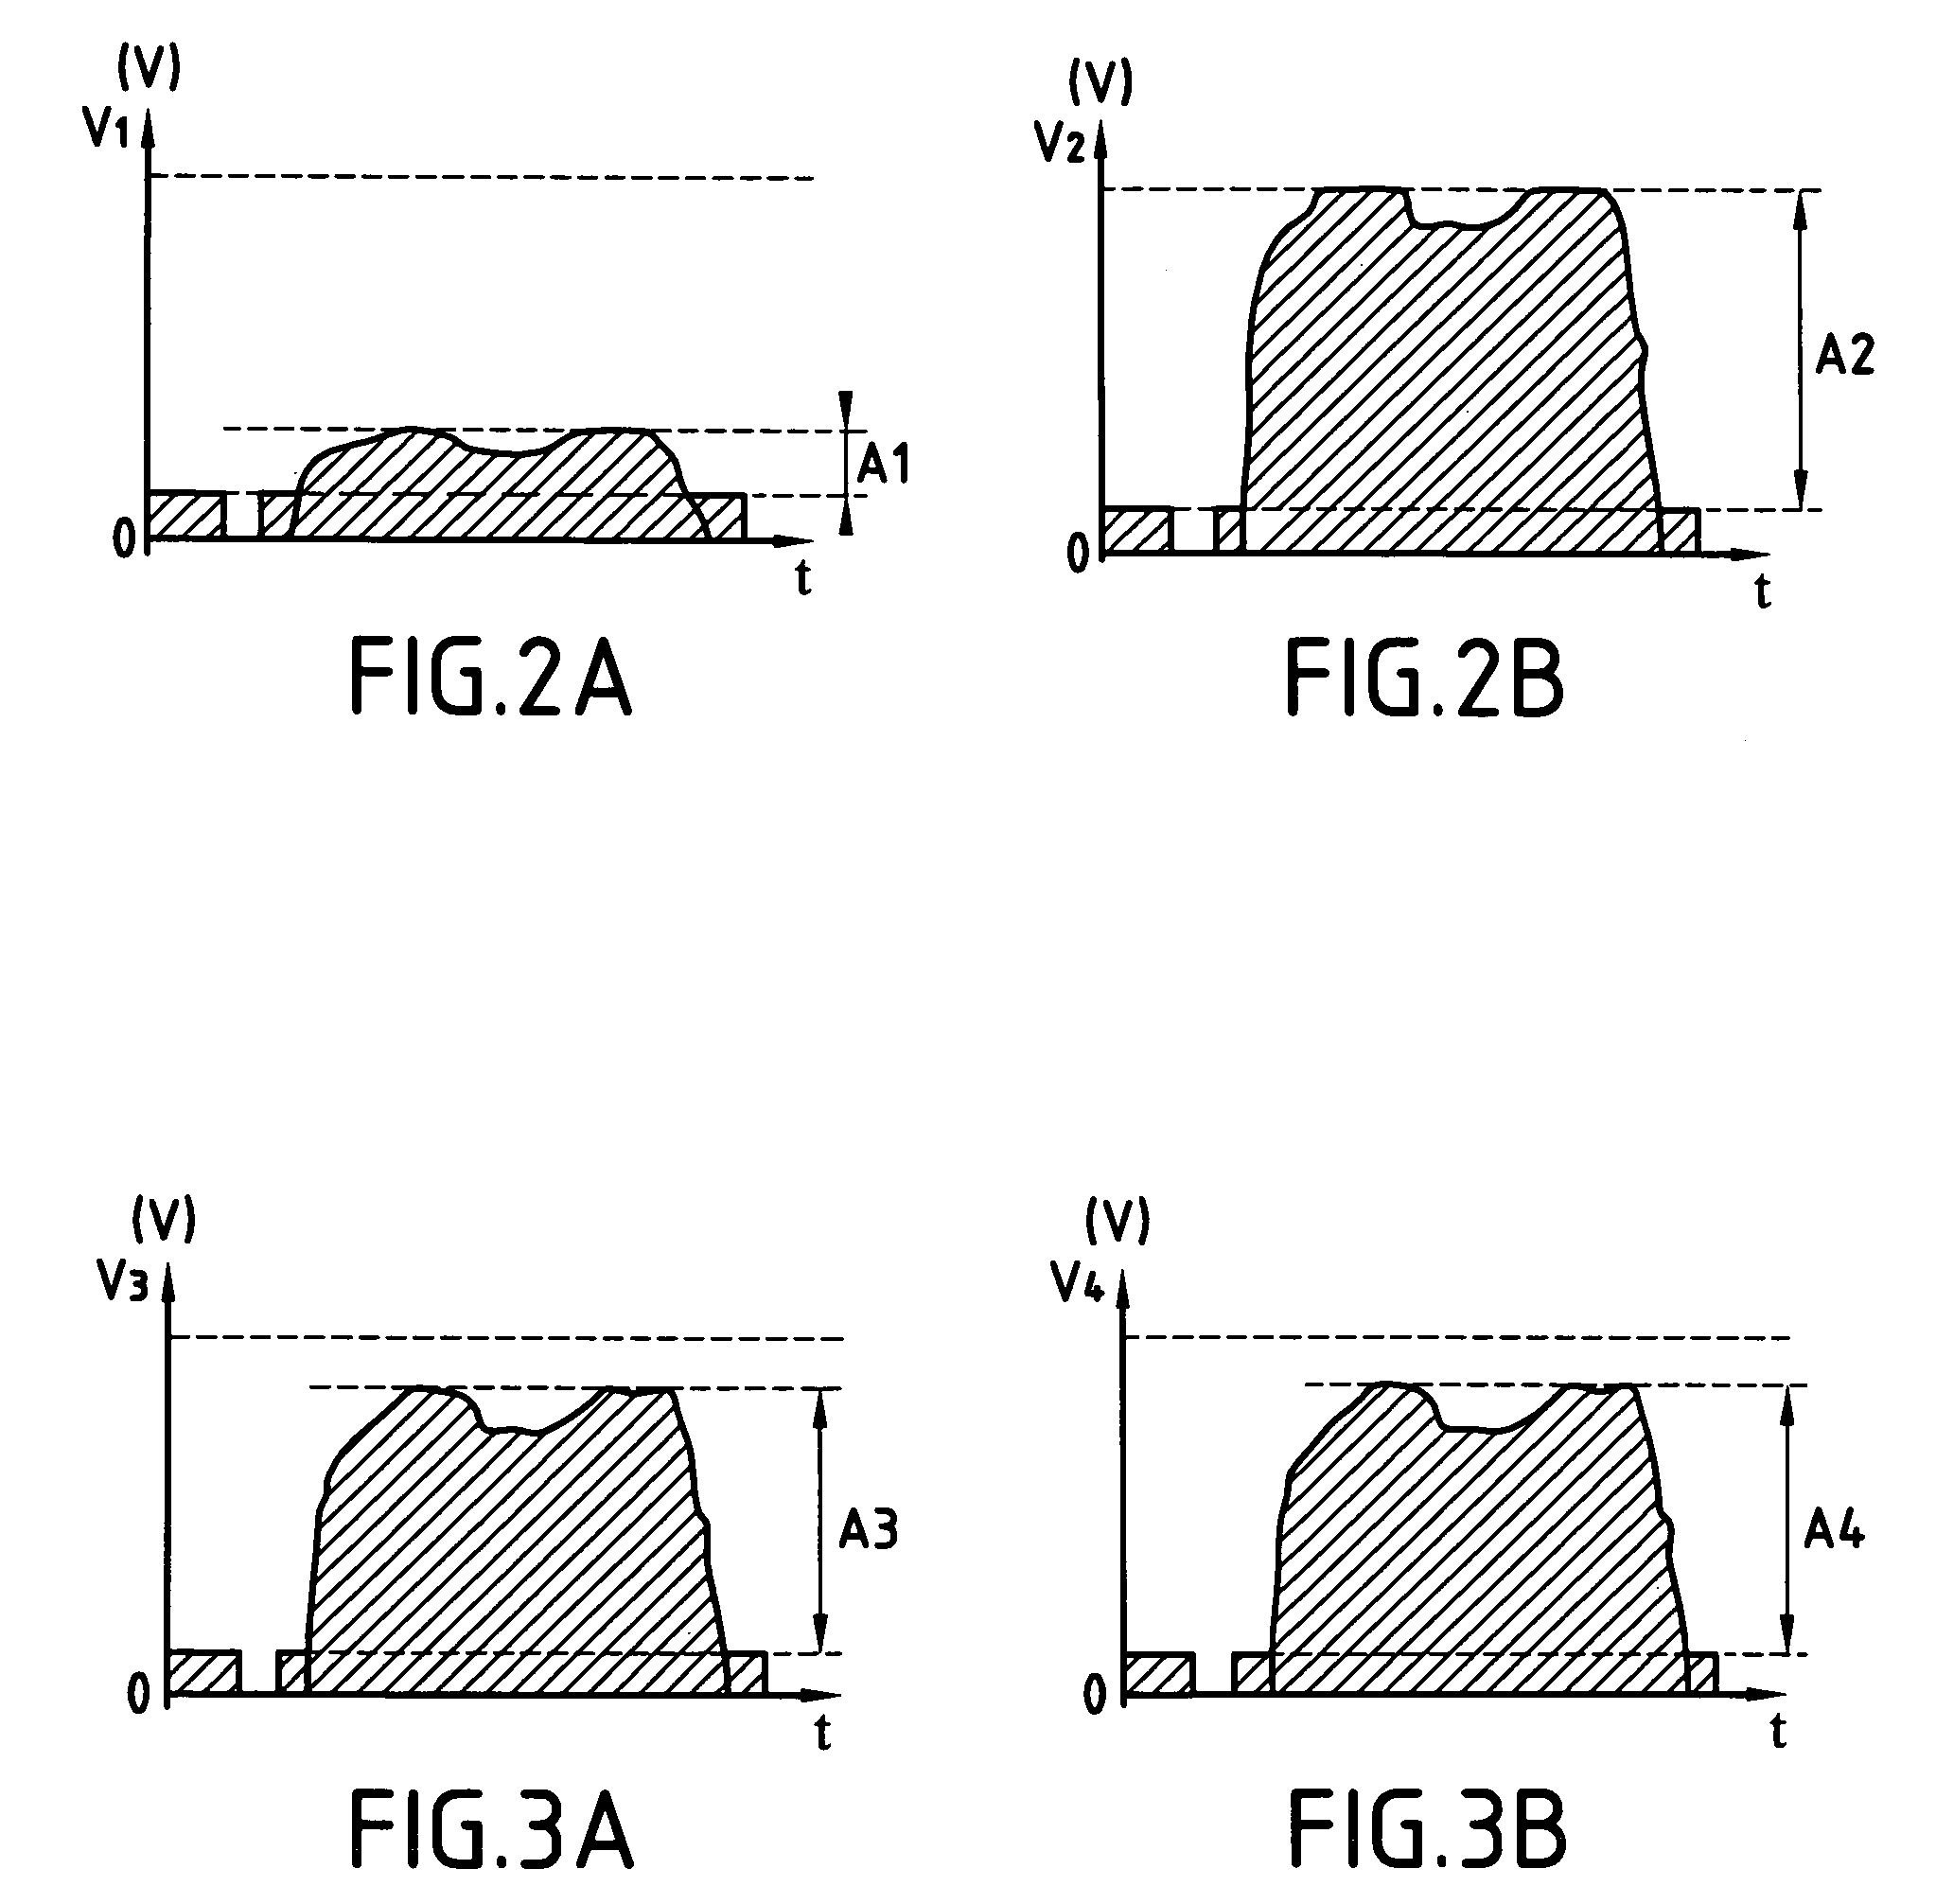 Method and apparatus for inspecting hot hollow articles that are translucent or transparent